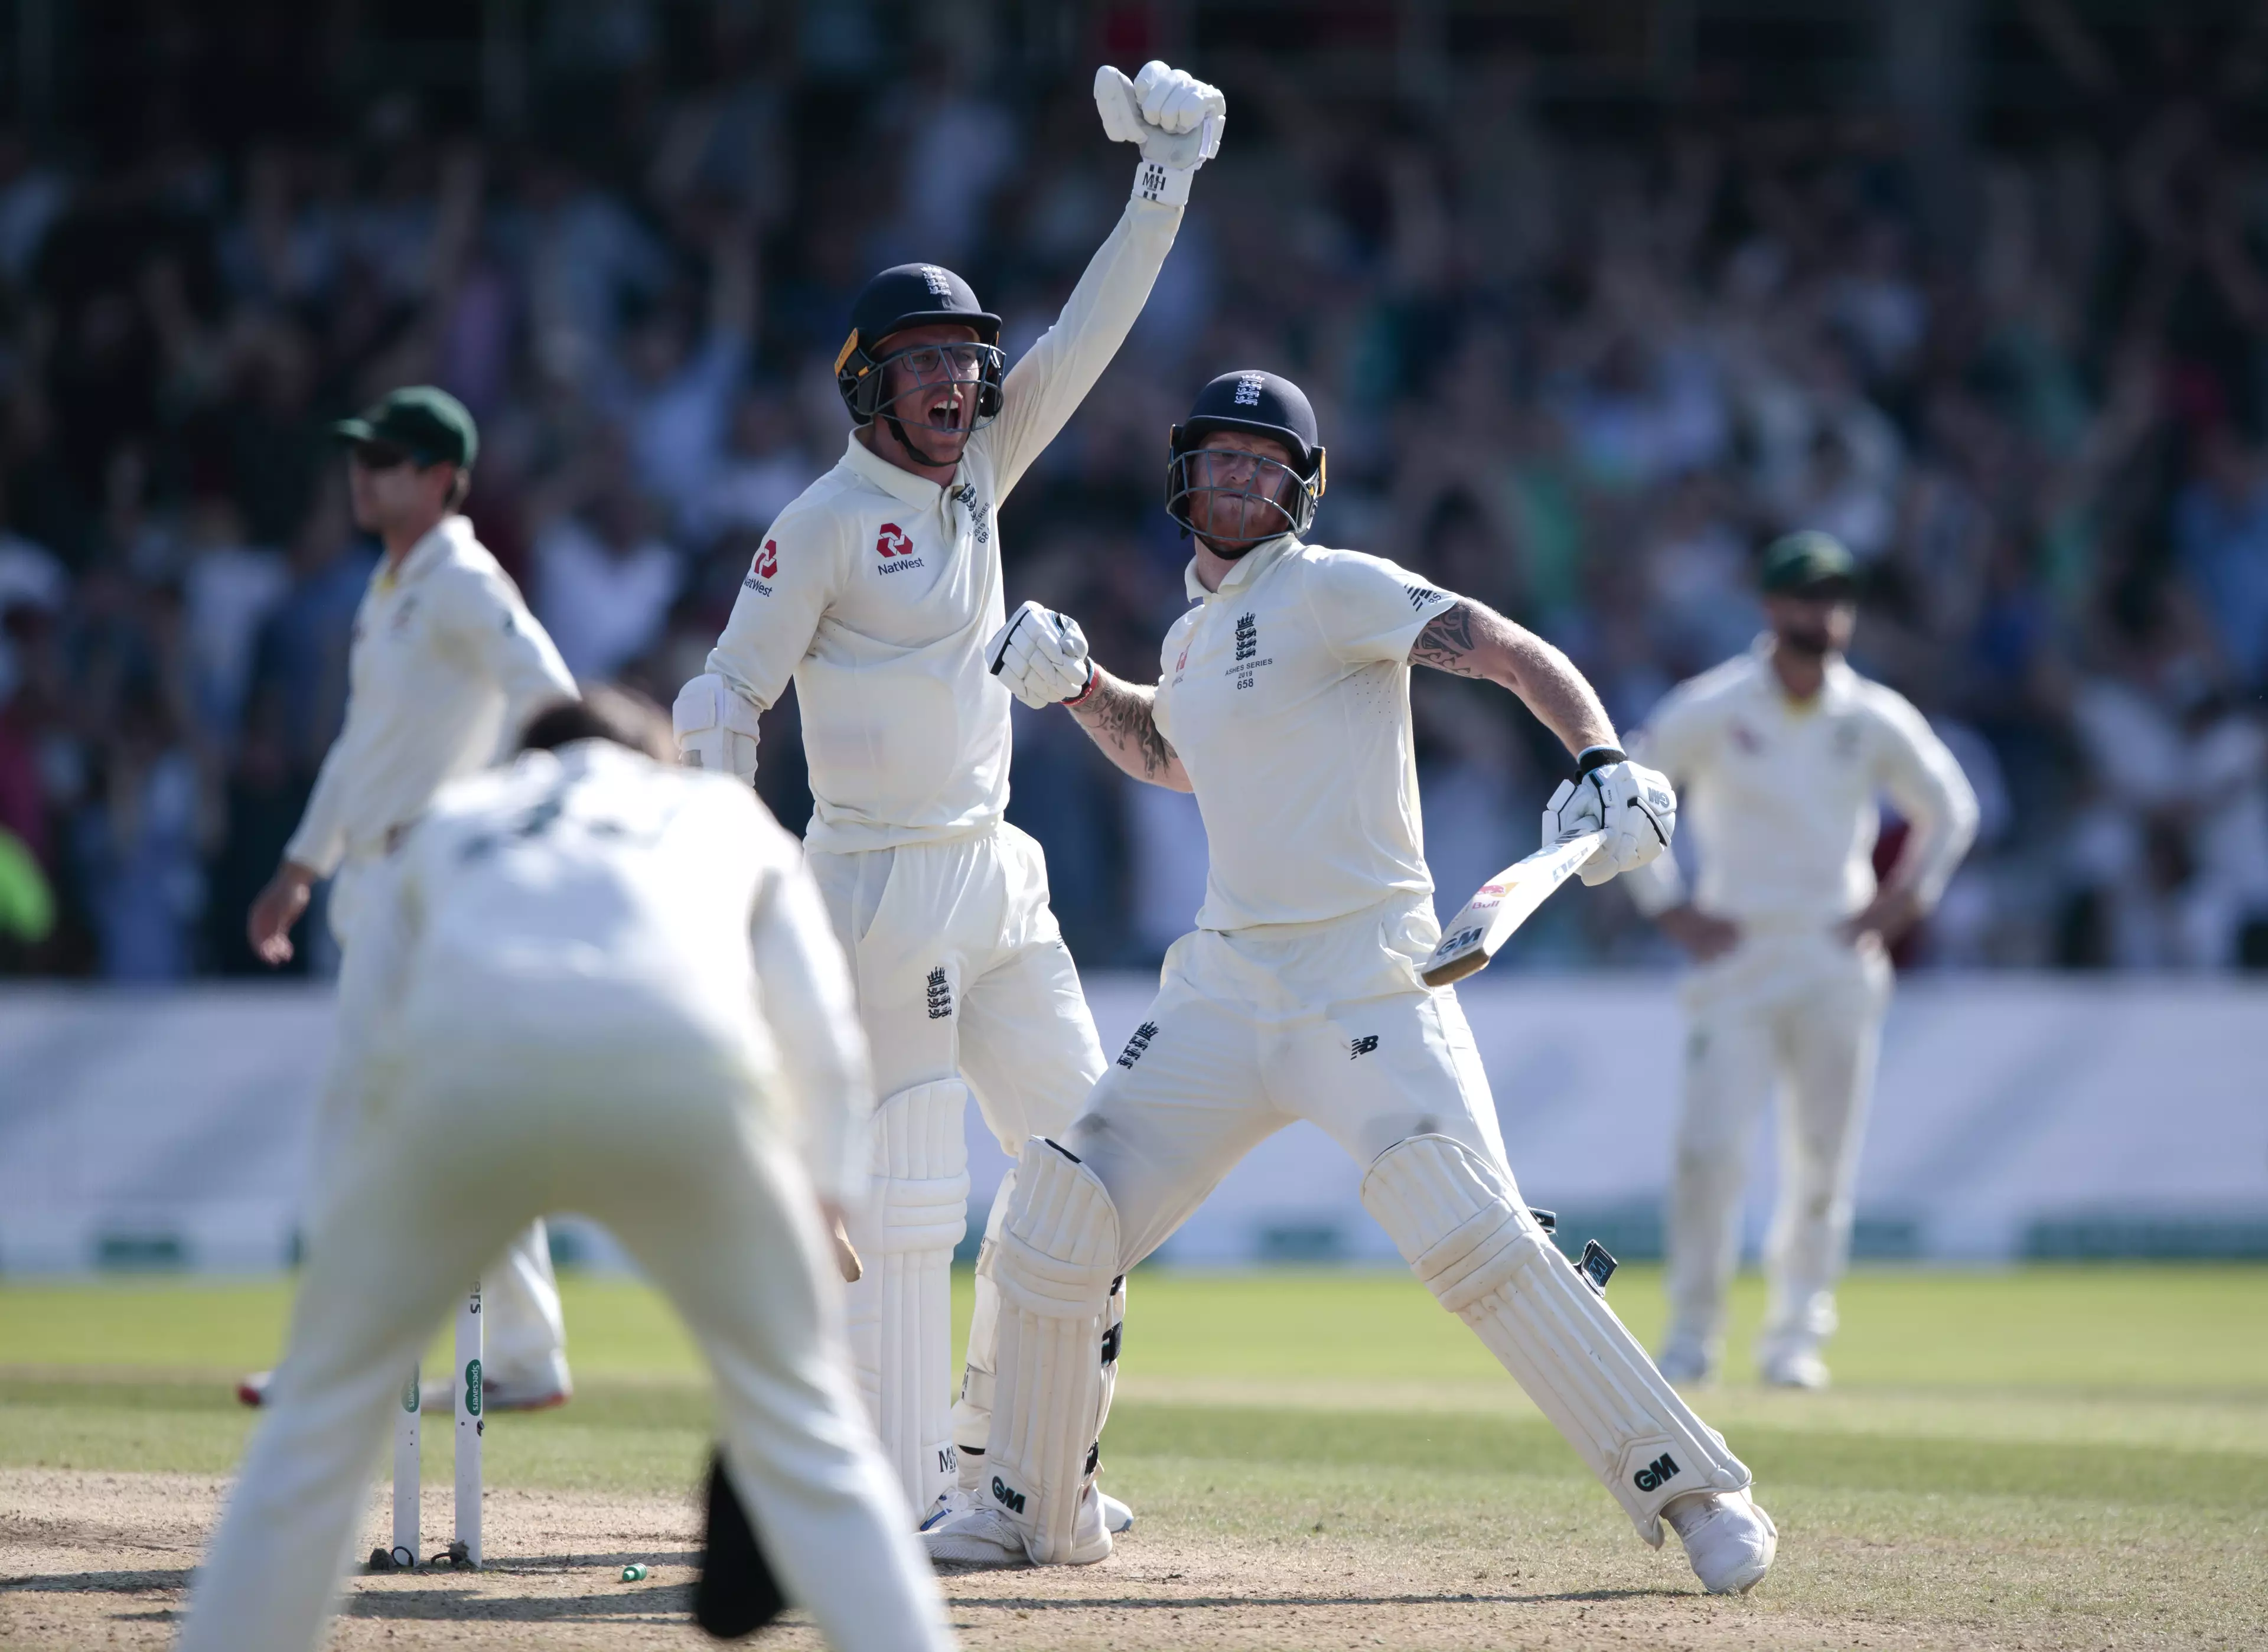 England celebrated a dramatic victory over Australia in the third Ashes test match.